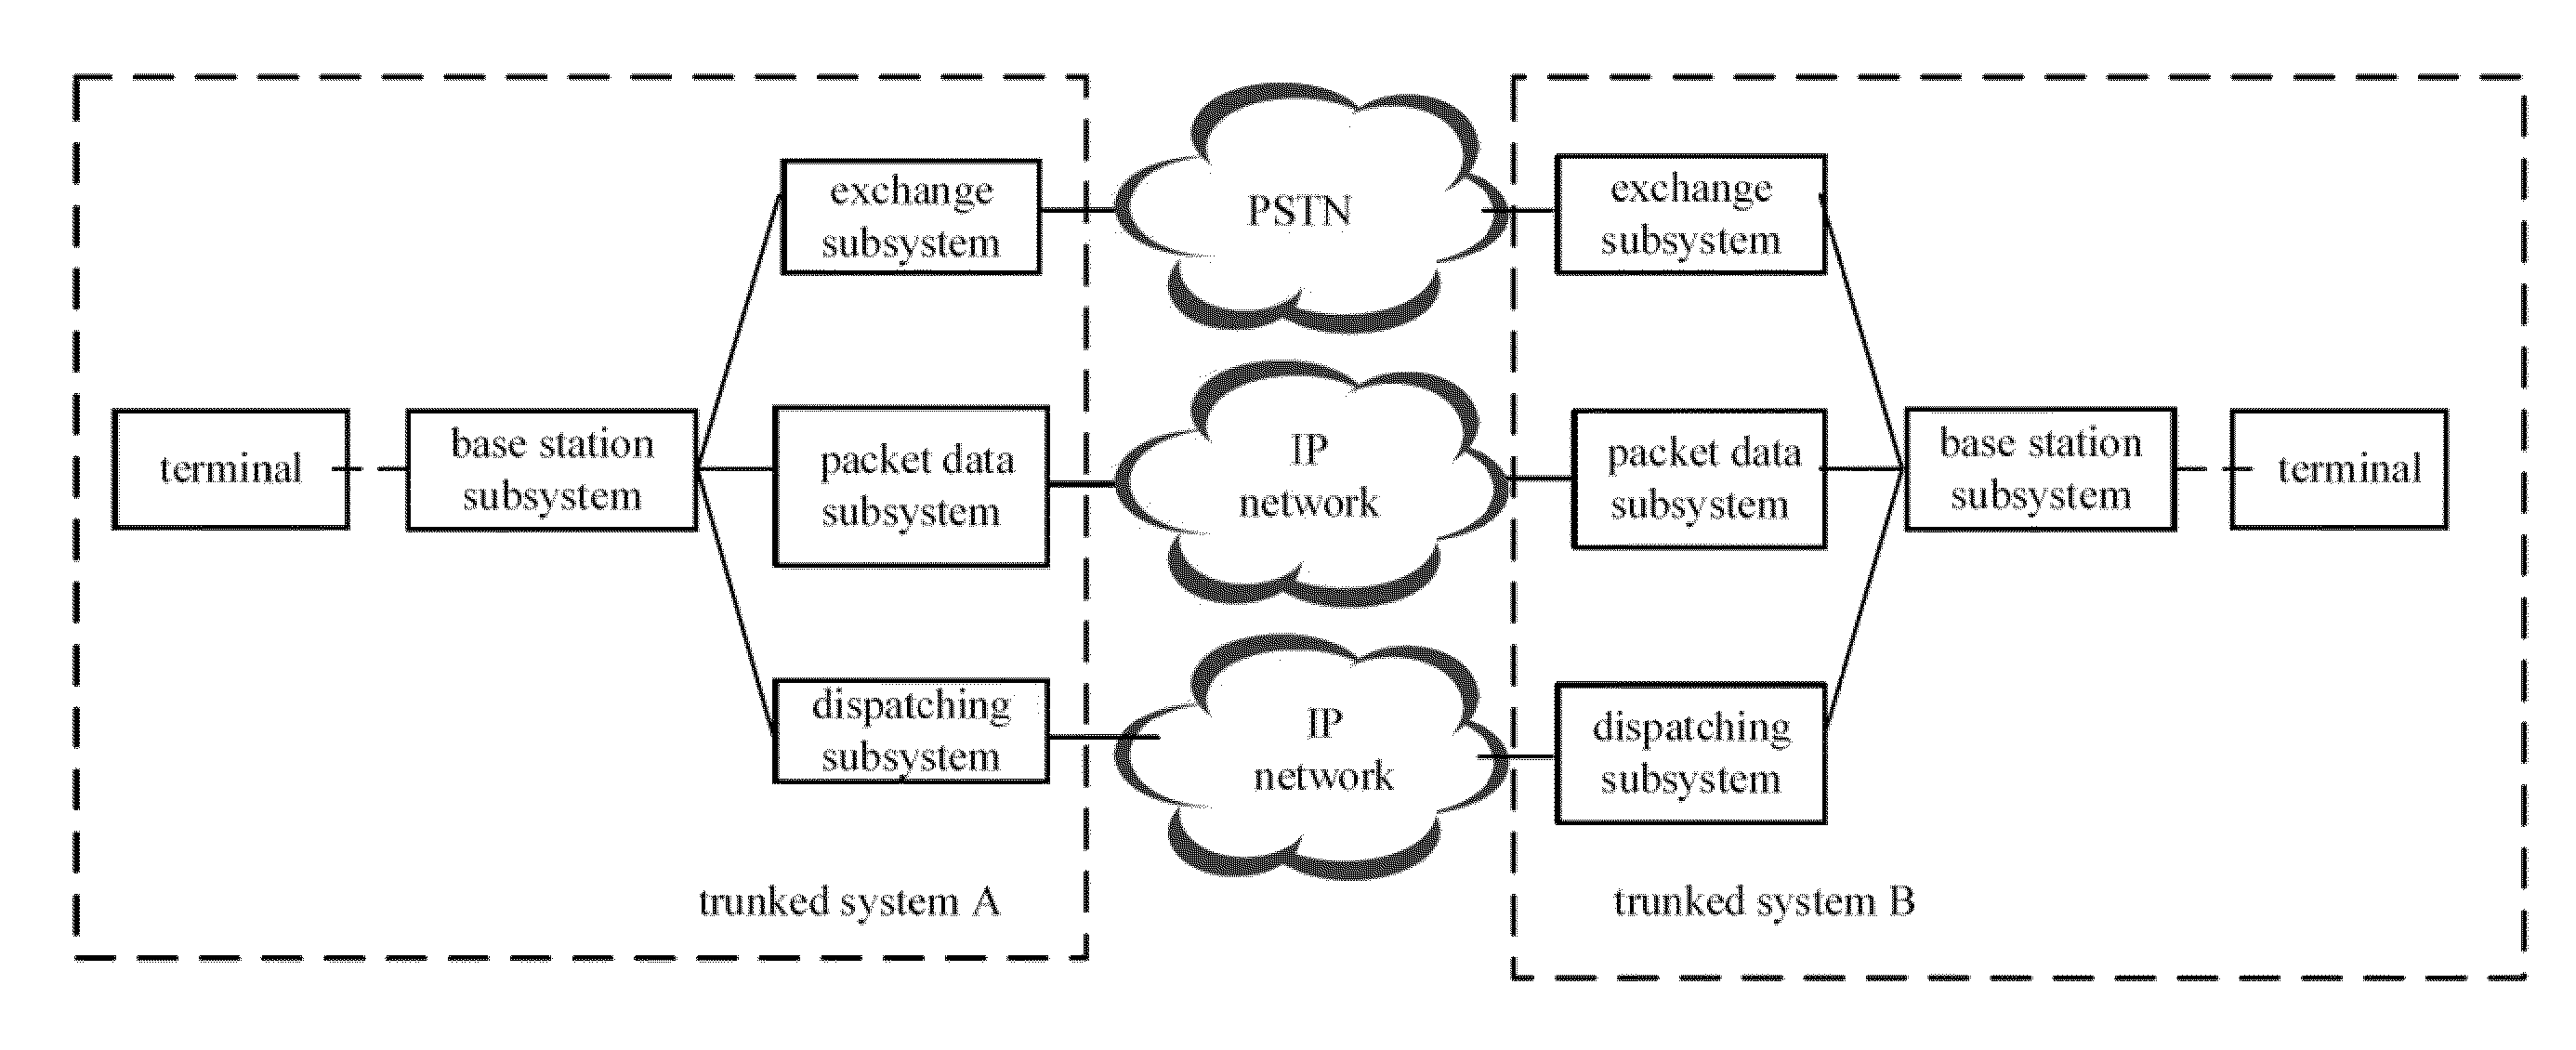 Digital trunked communication network which supports roaming and method thereof